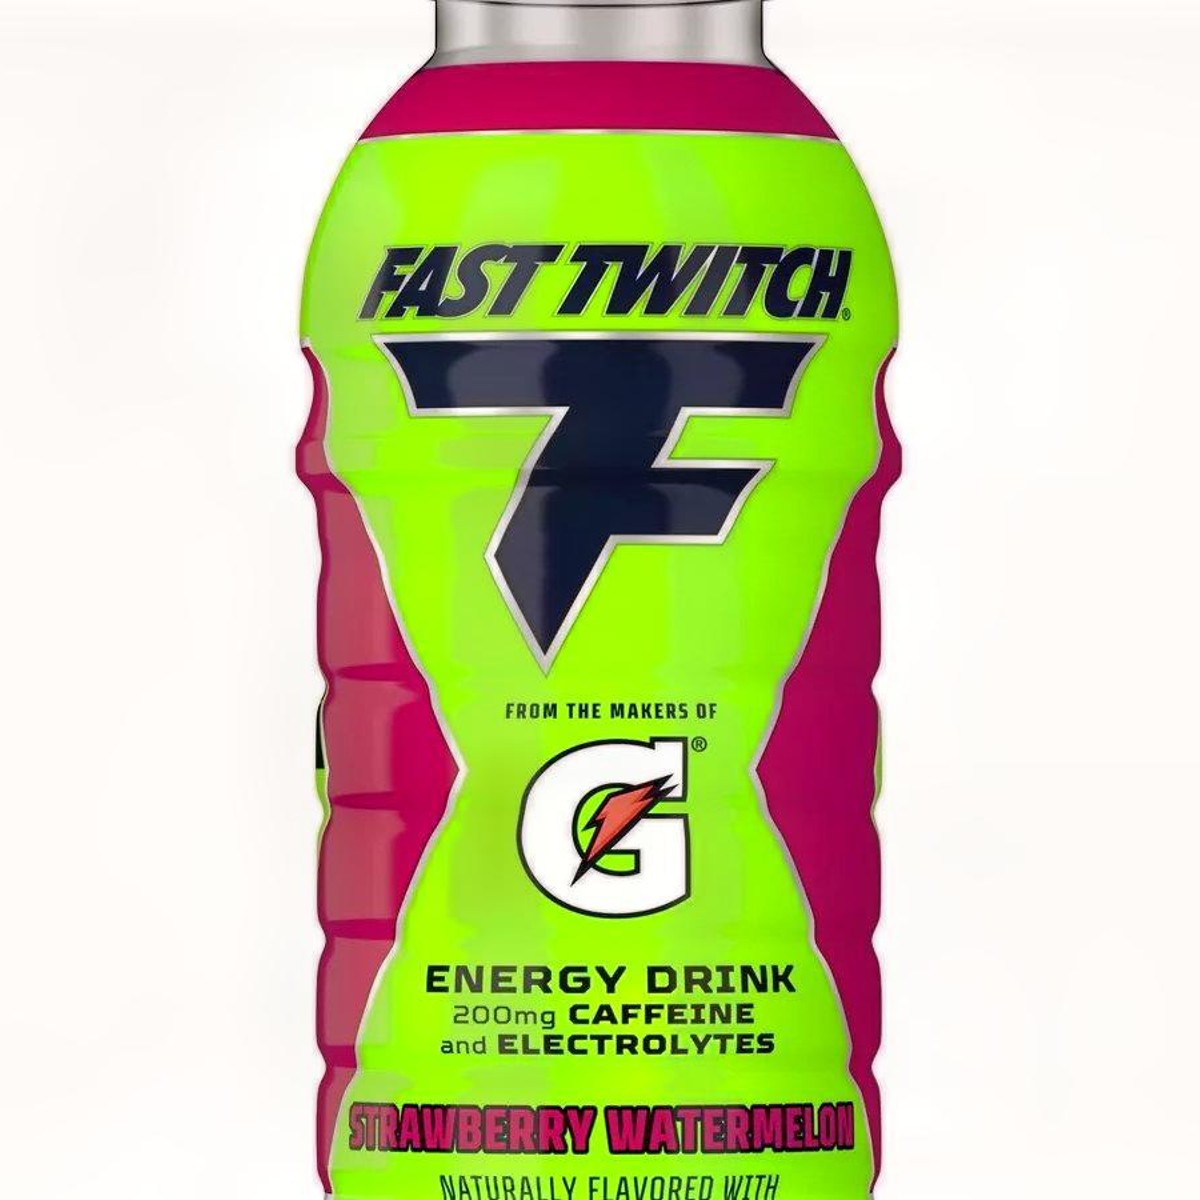 Fast Twitch Orange Energy Drink, 200mg Caffeine, Zero Sugar, Electrolytes,  Vitamins B6 and B12, 1 Bottle in the Soft Drinks department at